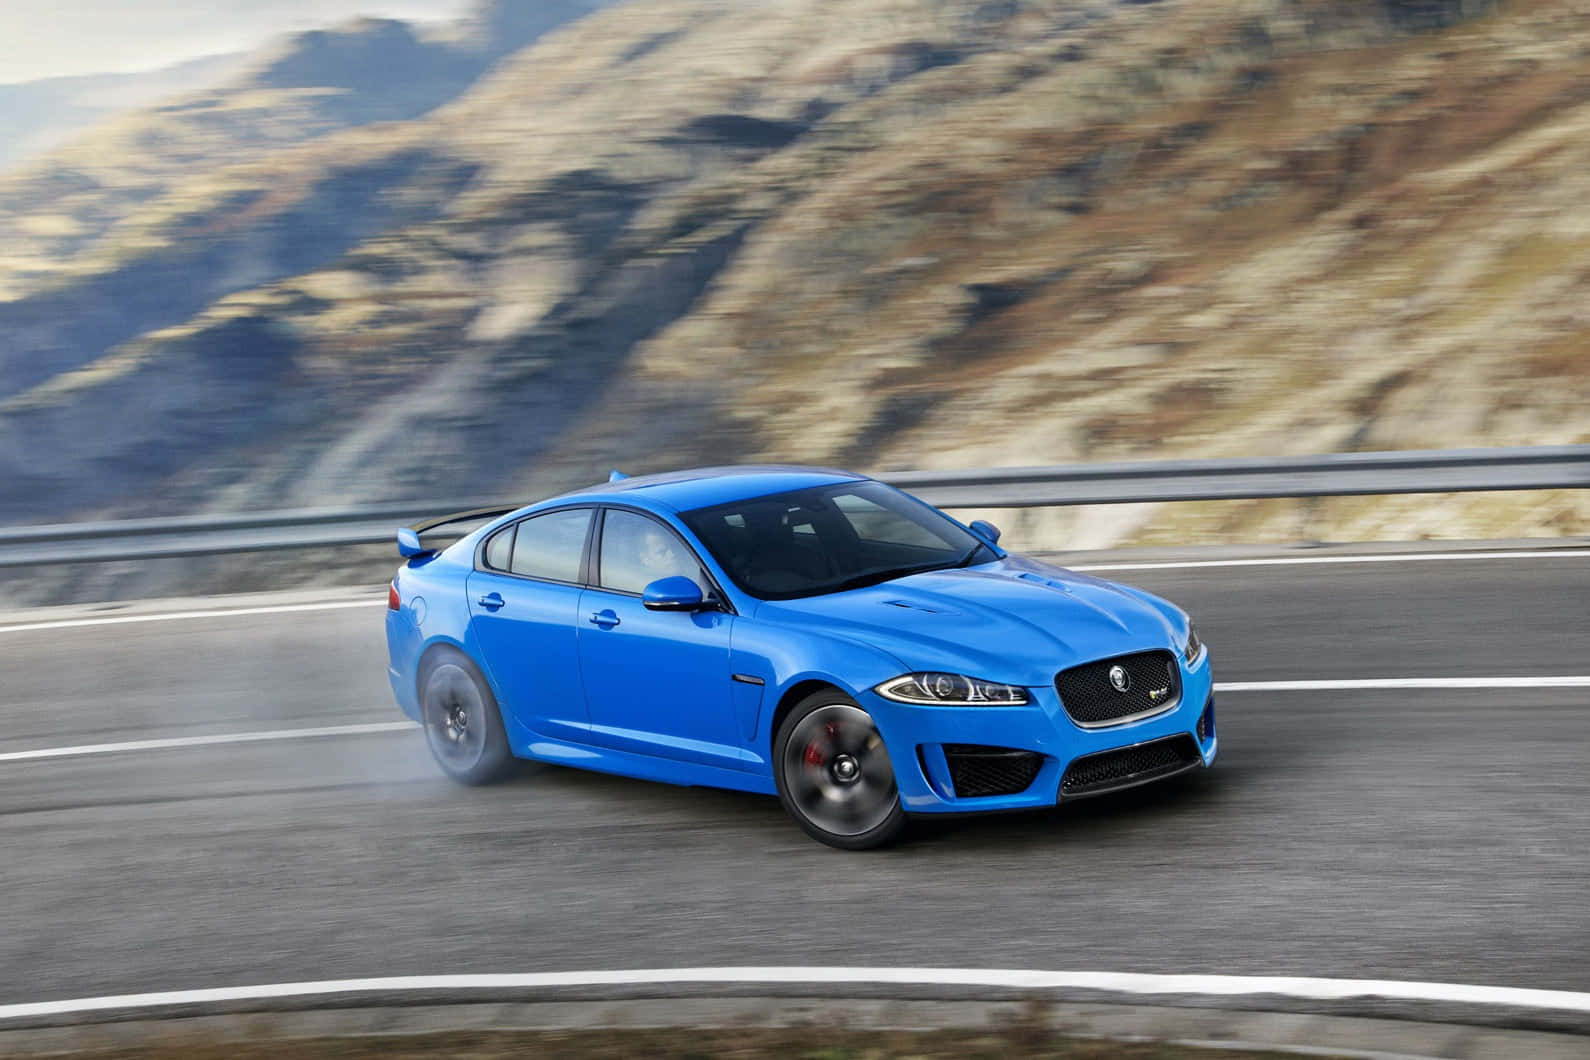 The Stunner in Red - The Immaculate Jaguar XFR Wallpaper